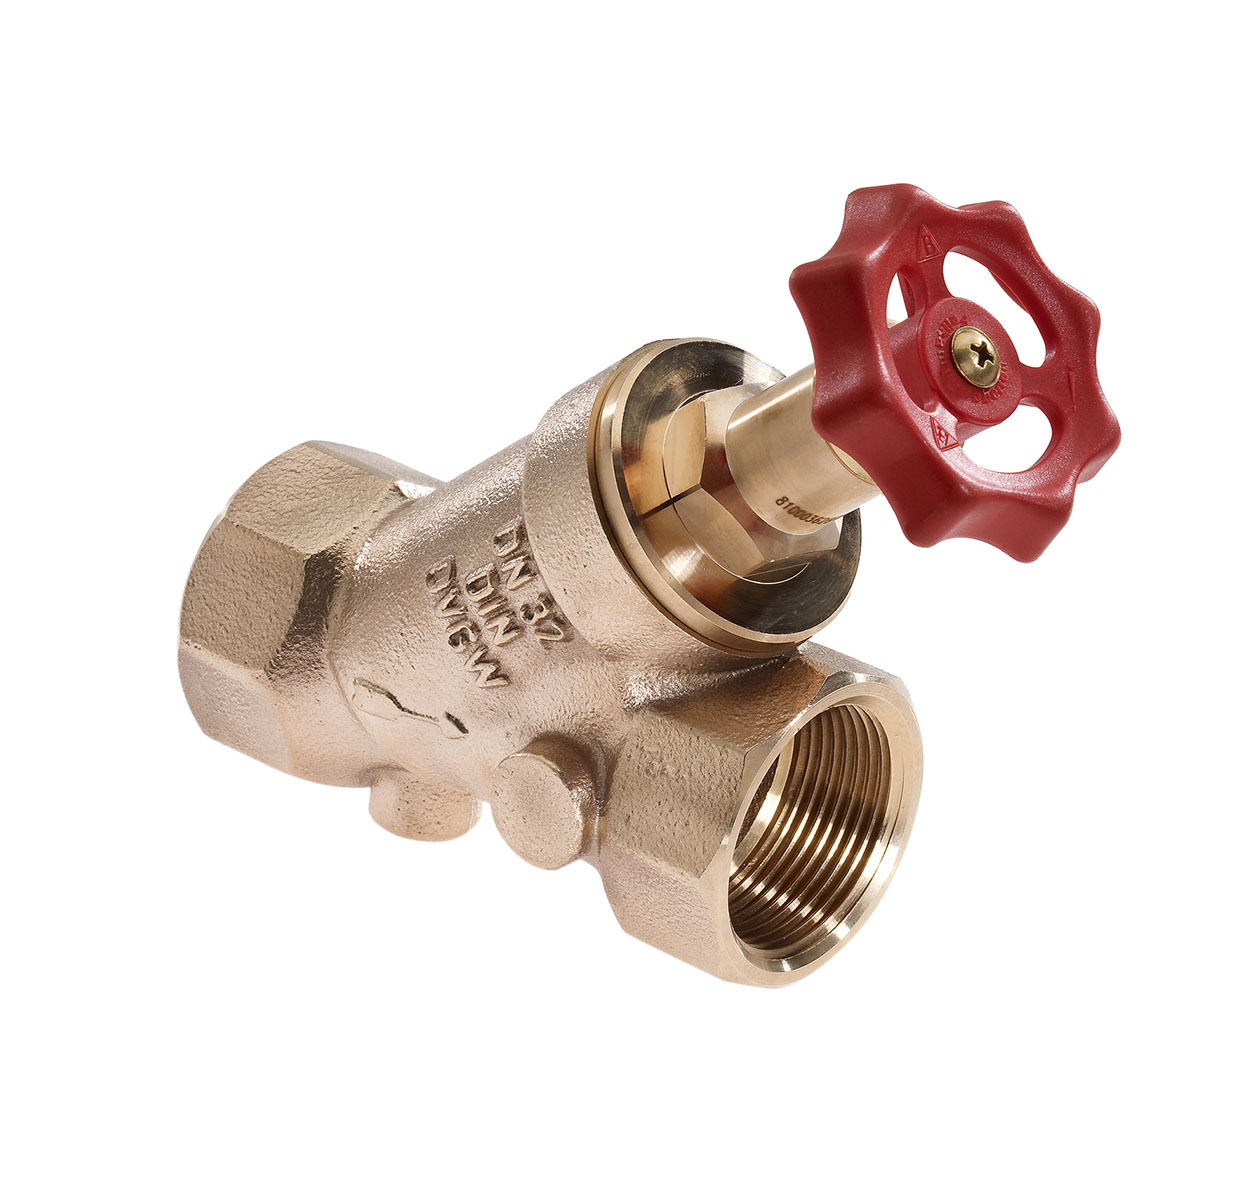 3501505 - Red-brass Free-flow valve with plugs on both sides, female thread, without drain valve